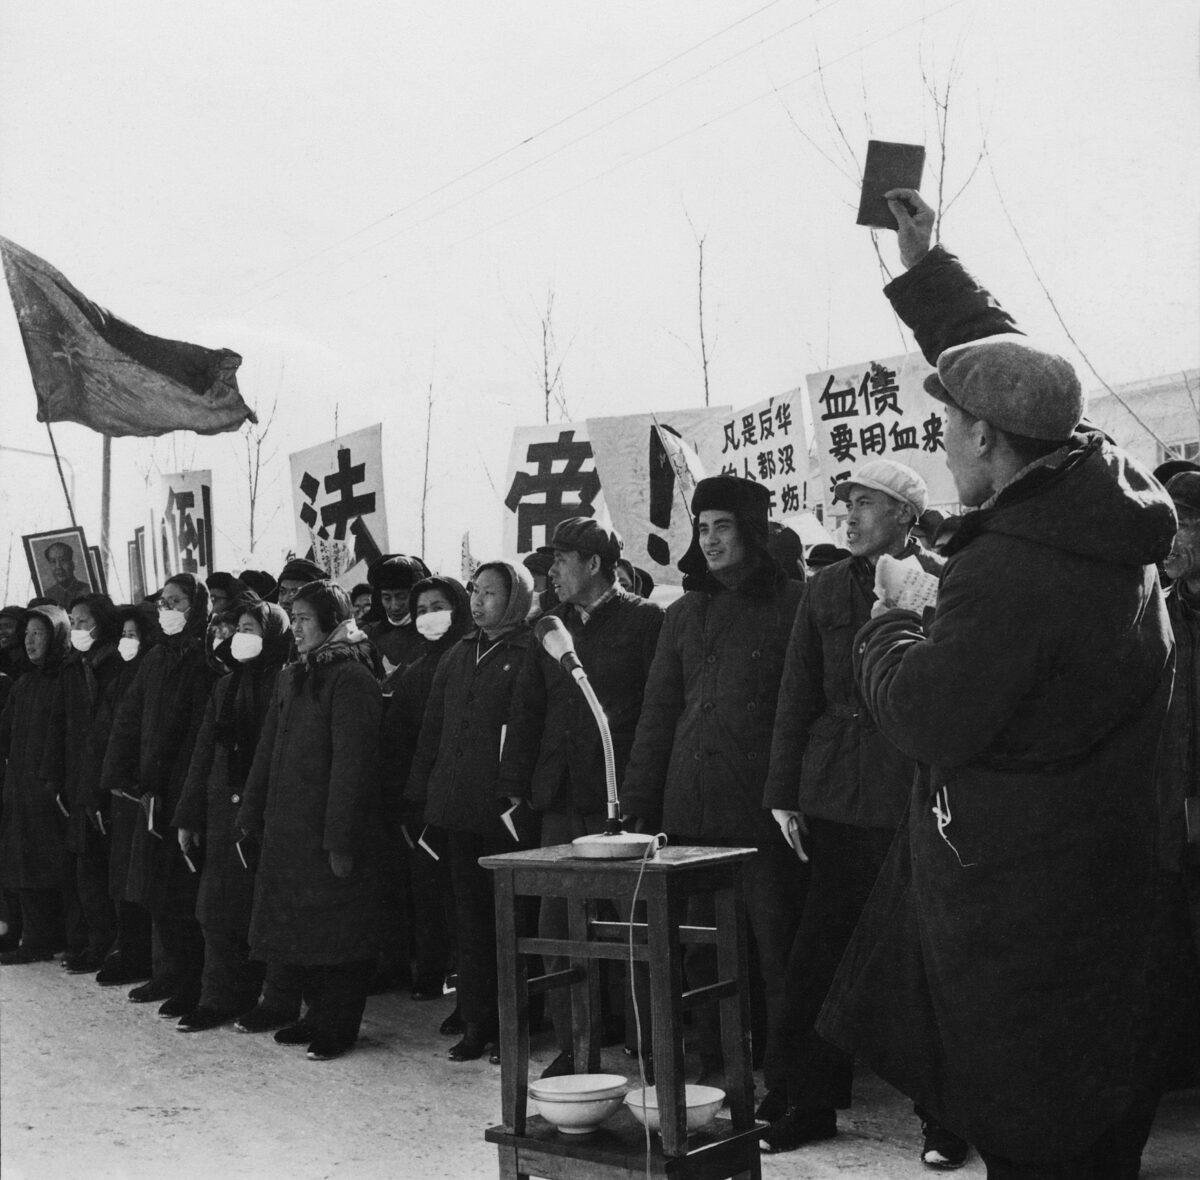 Chinese people demonstrate during the "great proletarian Cultural Revolution" in front of the French embassy in Beijing on January 1967. Protesters show symbols of the Revolution such as the portrait of Mao Zedong, banners, and the book "Quotations from Chairman Mao Tse-tung." Since the cultural revolution was launched in May 1966 at Beijing University, Mao's aim was to recapture power after the failure of the "Great Leap Forward." The movement was directed against those "Party leaders in authority taking the capitalist road." (Jean Vincent/AFP via Getty Images)